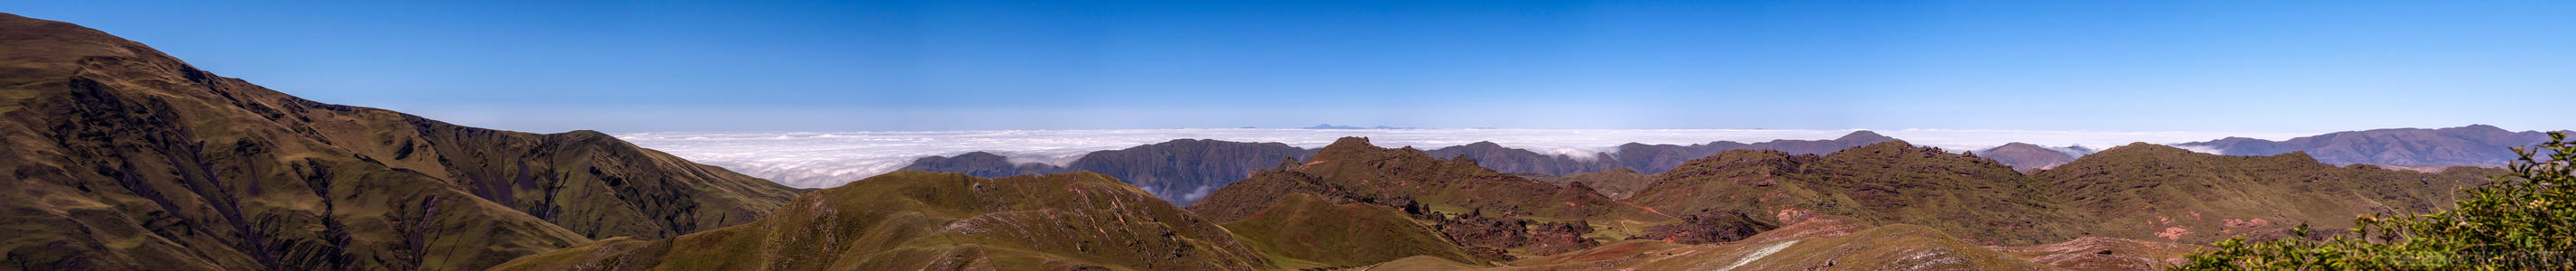 Above the Clouds at Piedra del Molino - At 3,348 meters, this mount pass get you far above the clouds in the far off distance